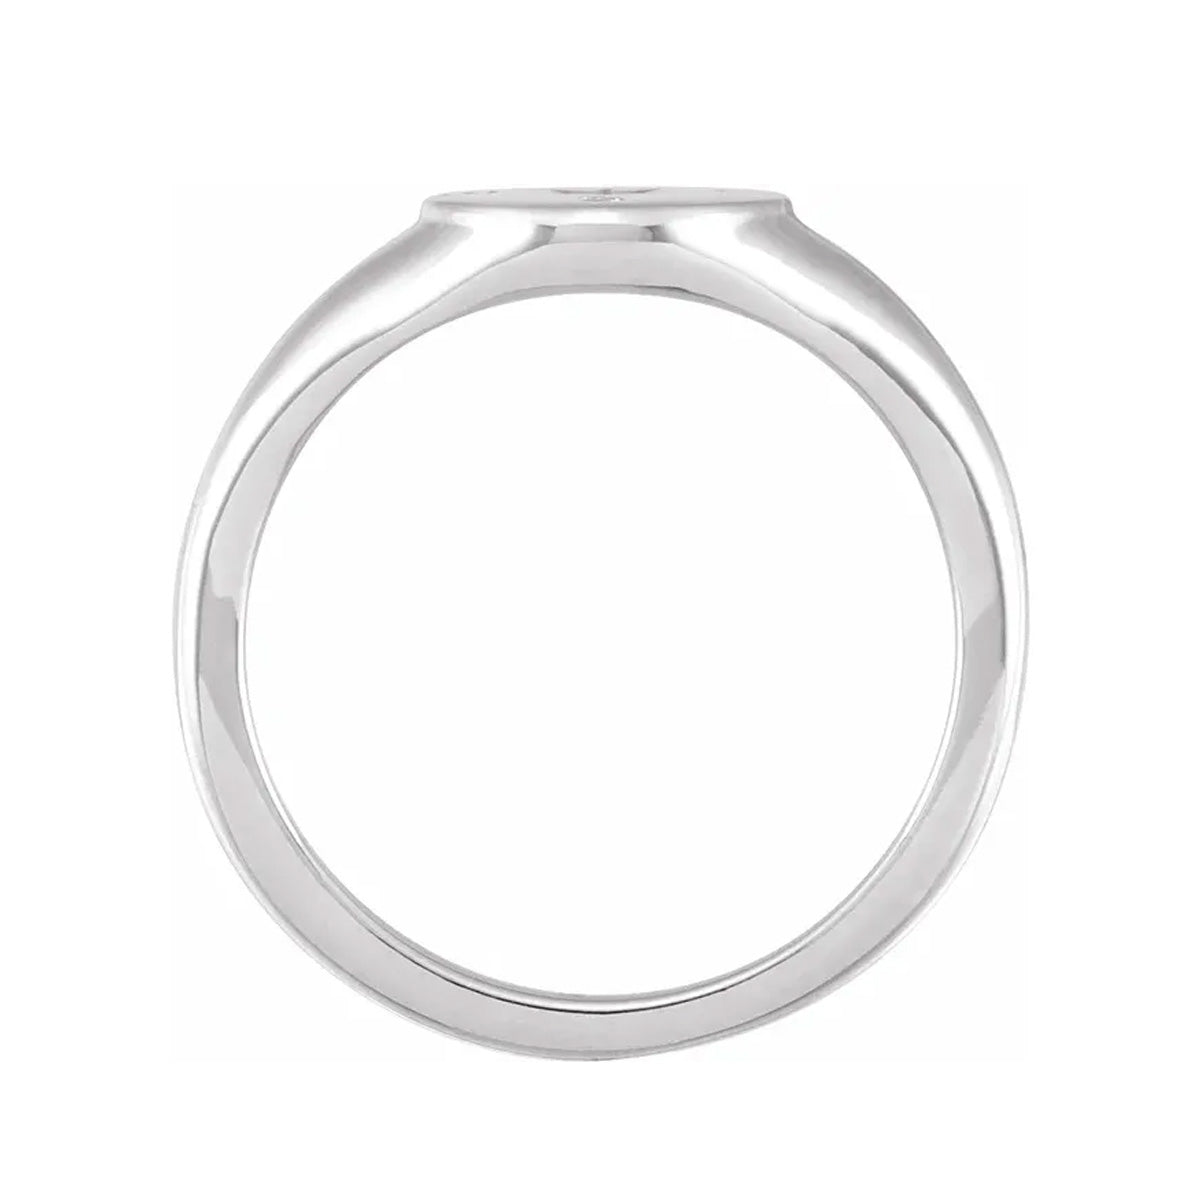 Women’s Silver Compass Signet Ring